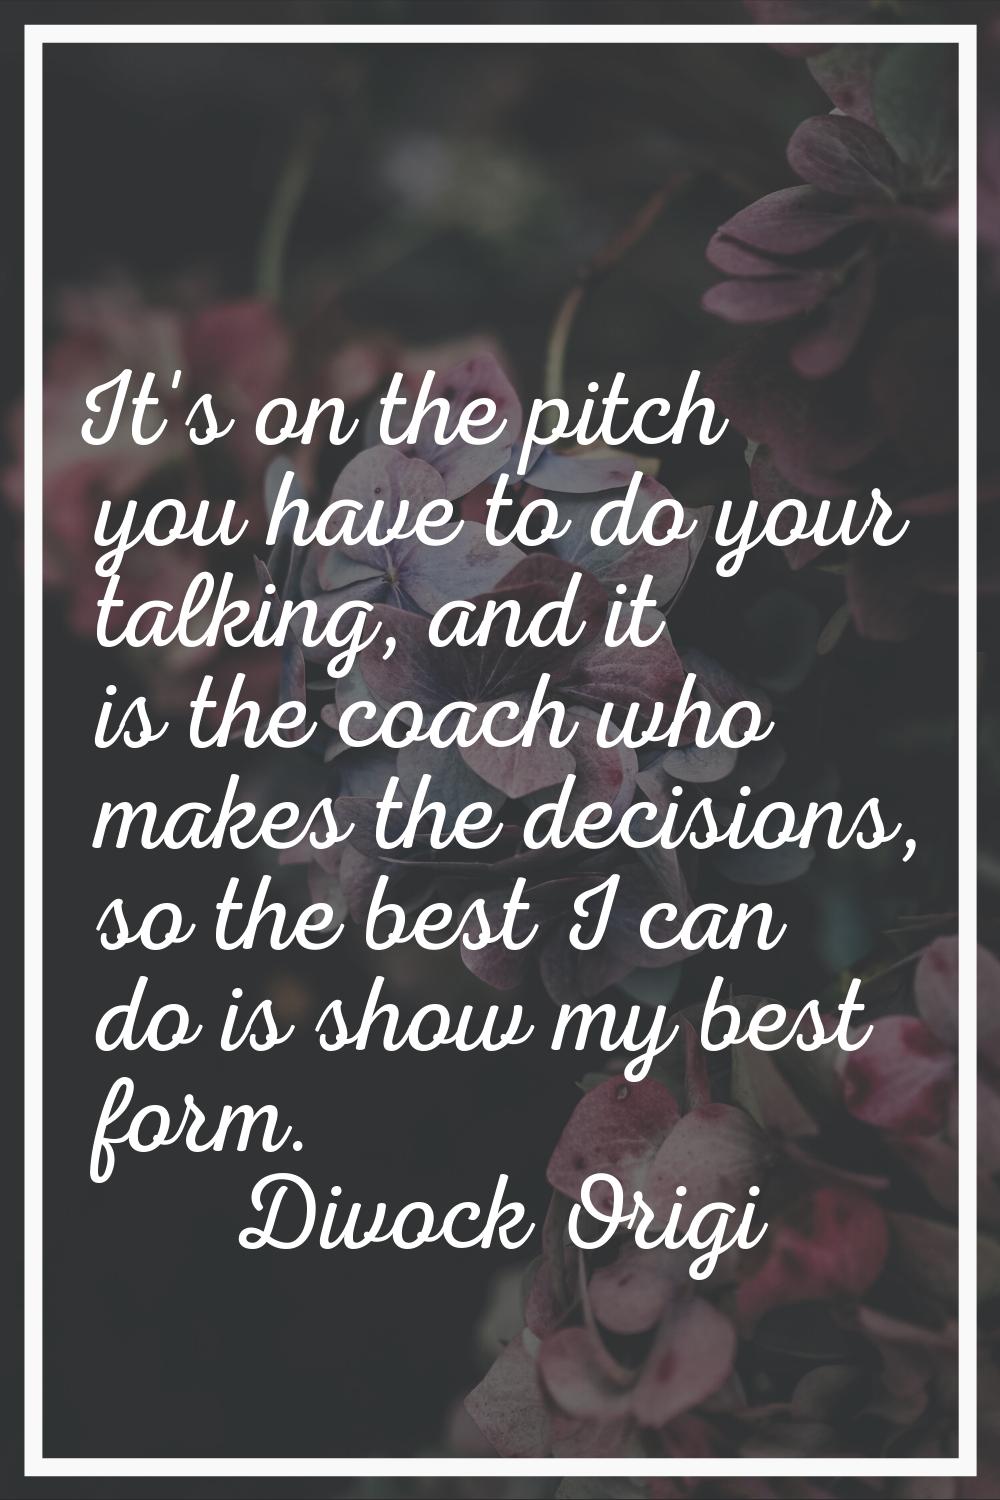 It's on the pitch you have to do your talking, and it is the coach who makes the decisions, so the 